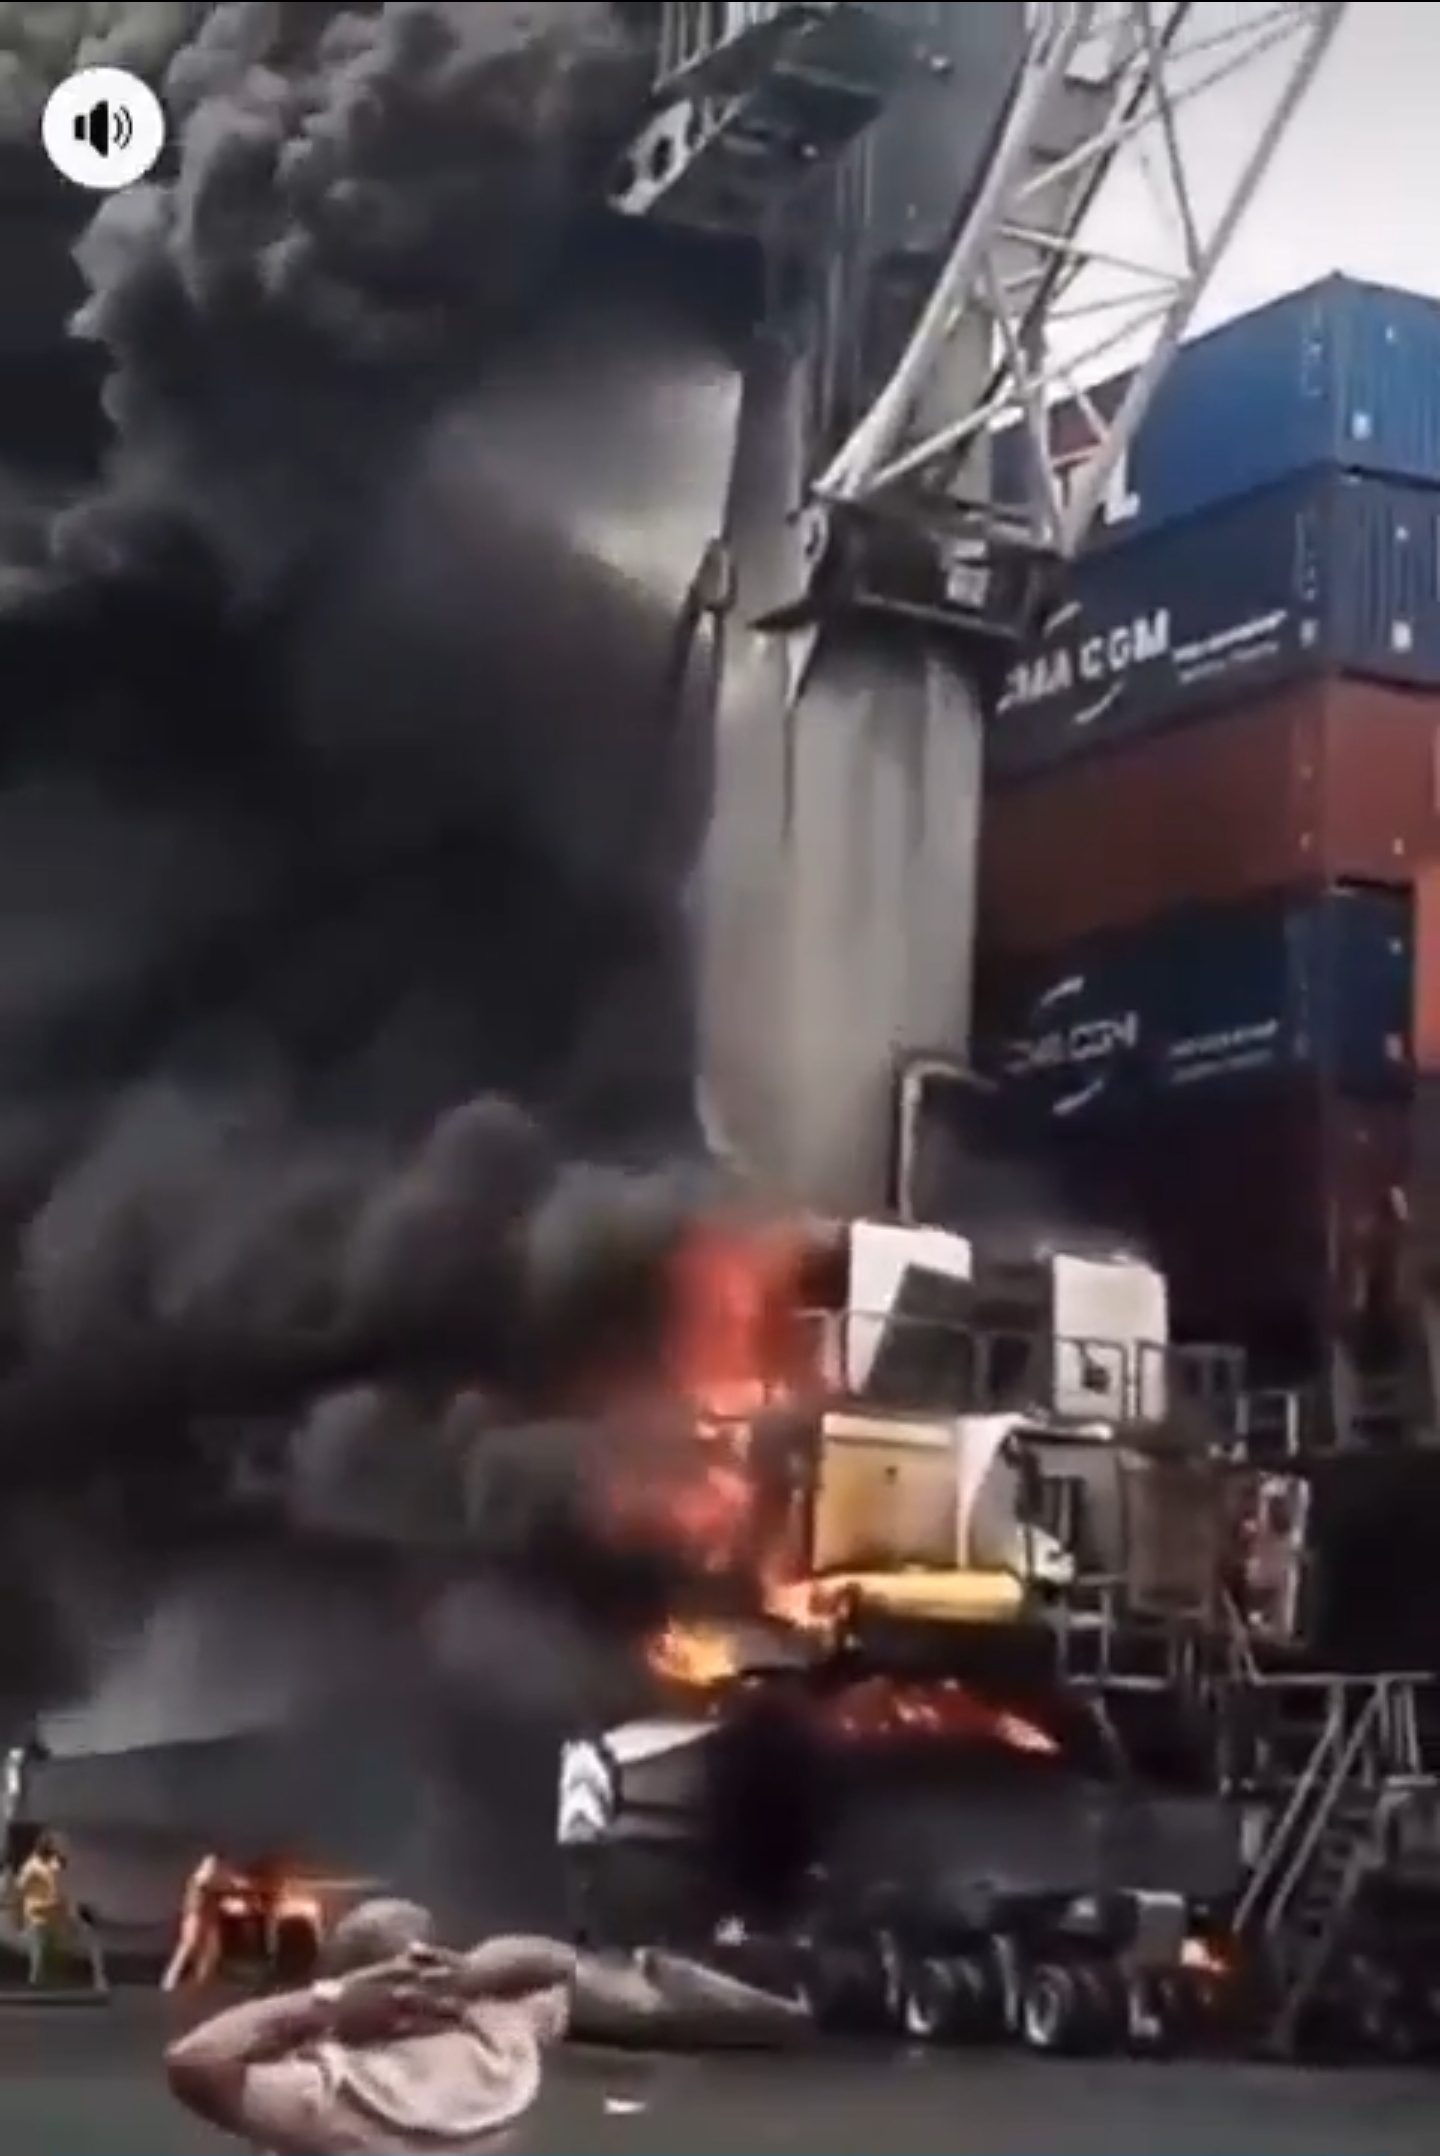 Moment Lagos Ports and Terminal Guts Fire (PHOTOS, VIDEO)